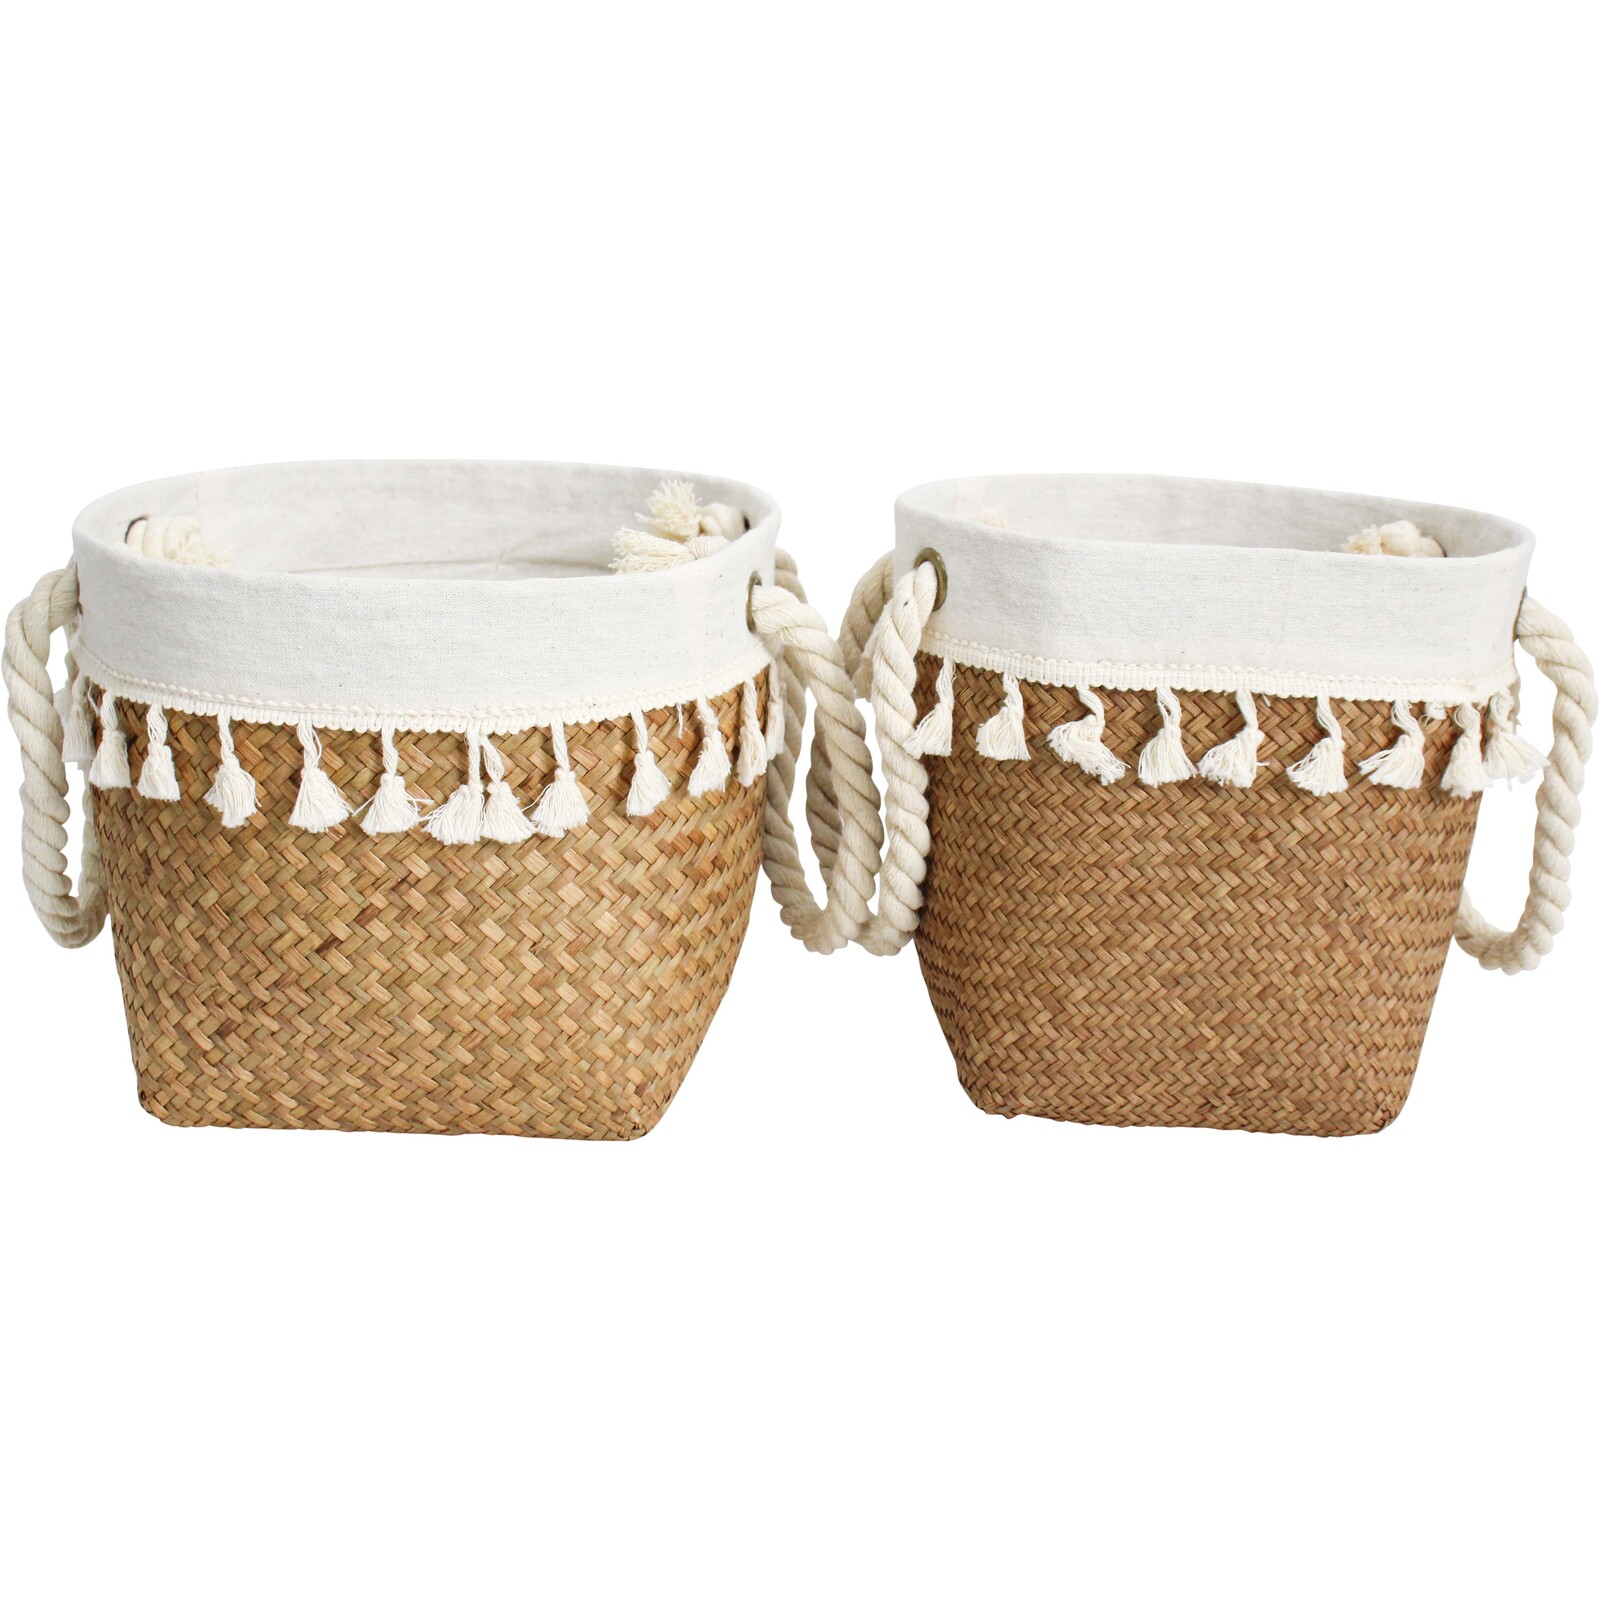 Woven Lined Baskets S/2